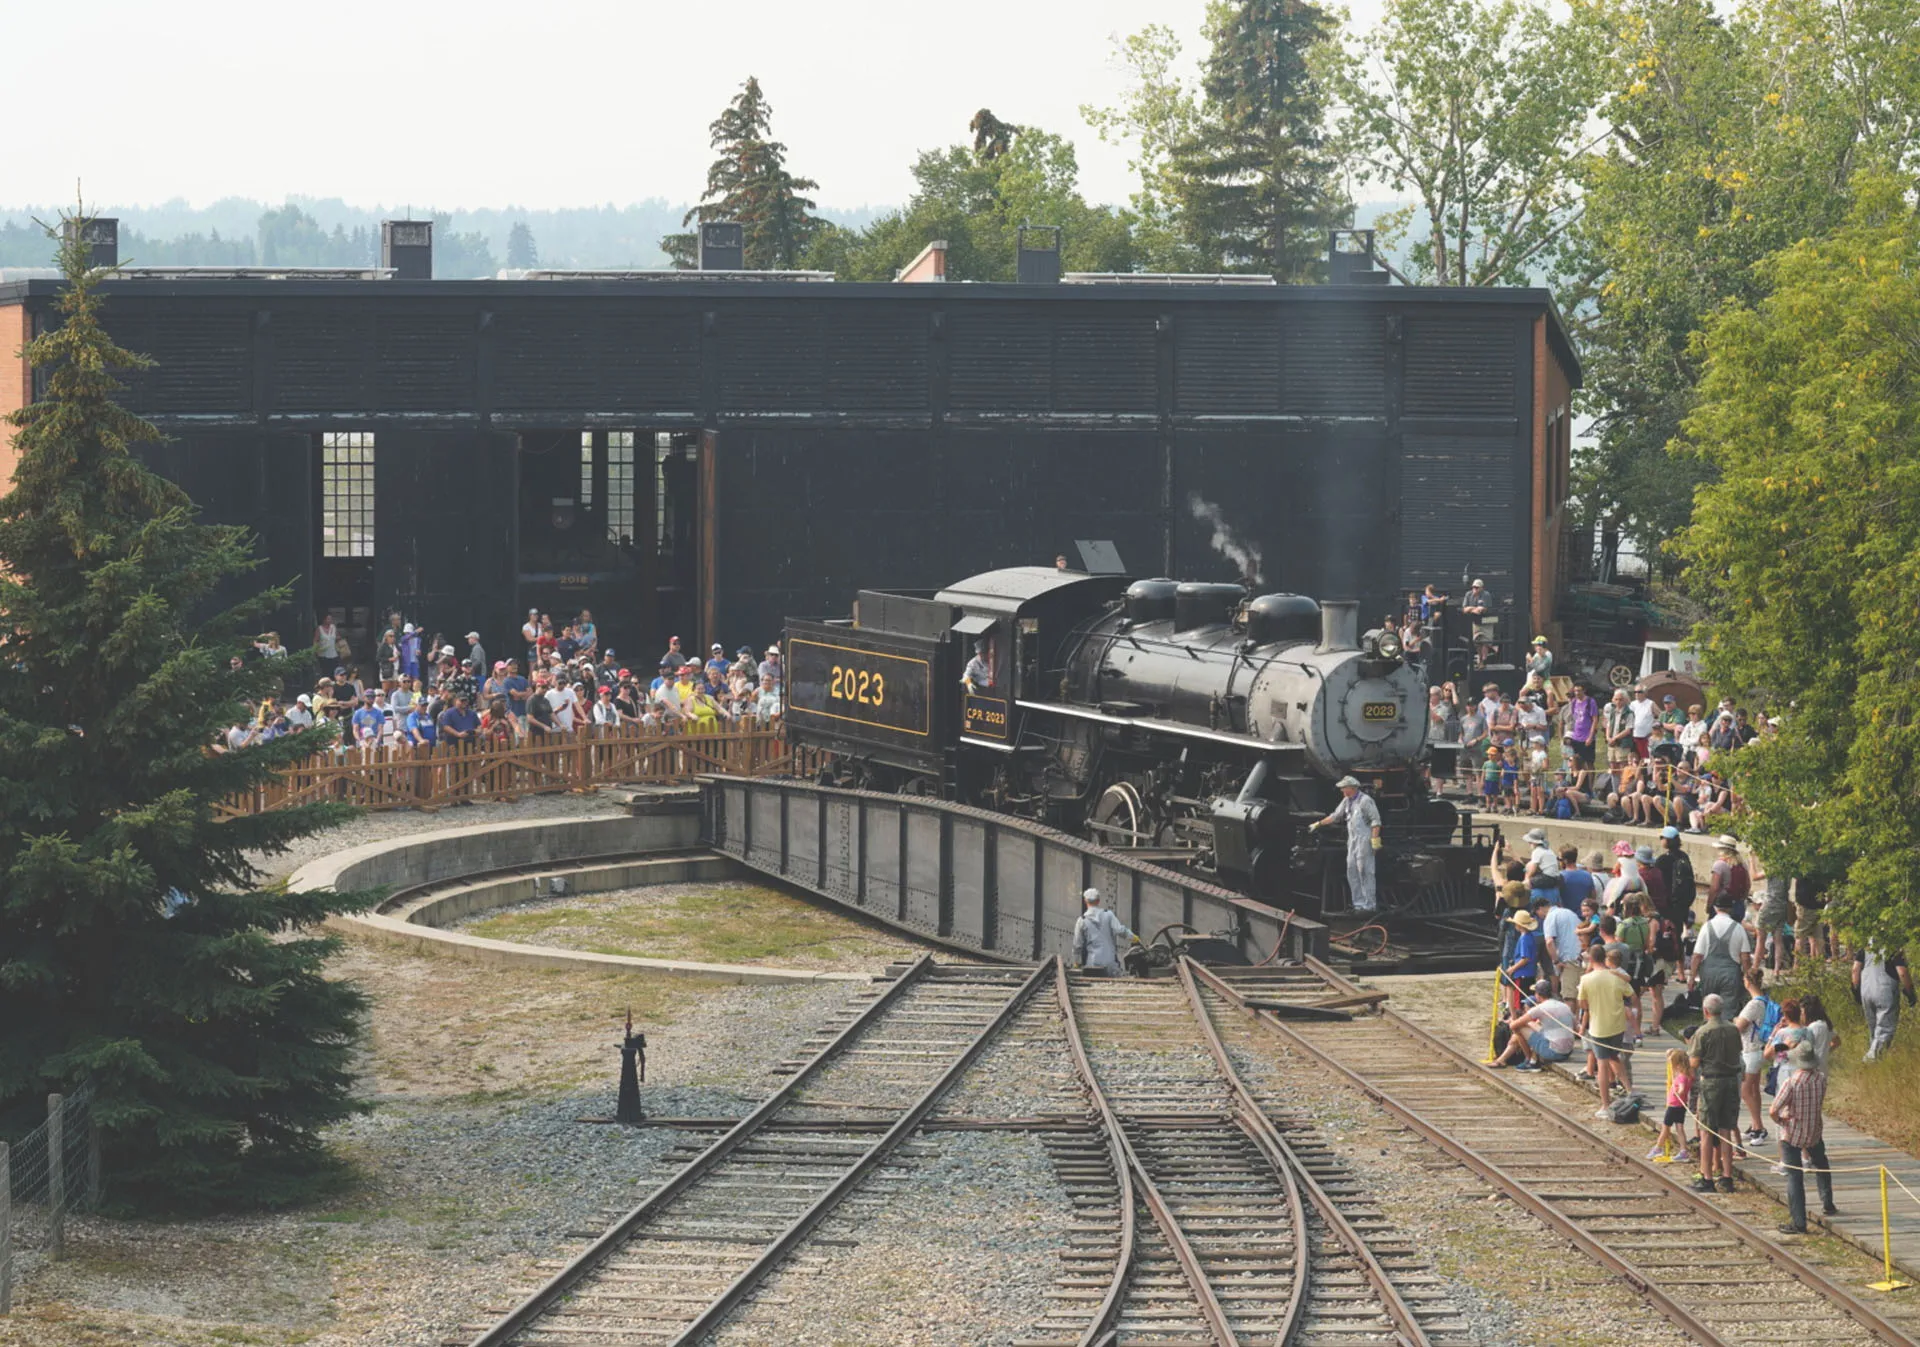 Crowd surrounding steam engine on railway Turntable at Heritage Park